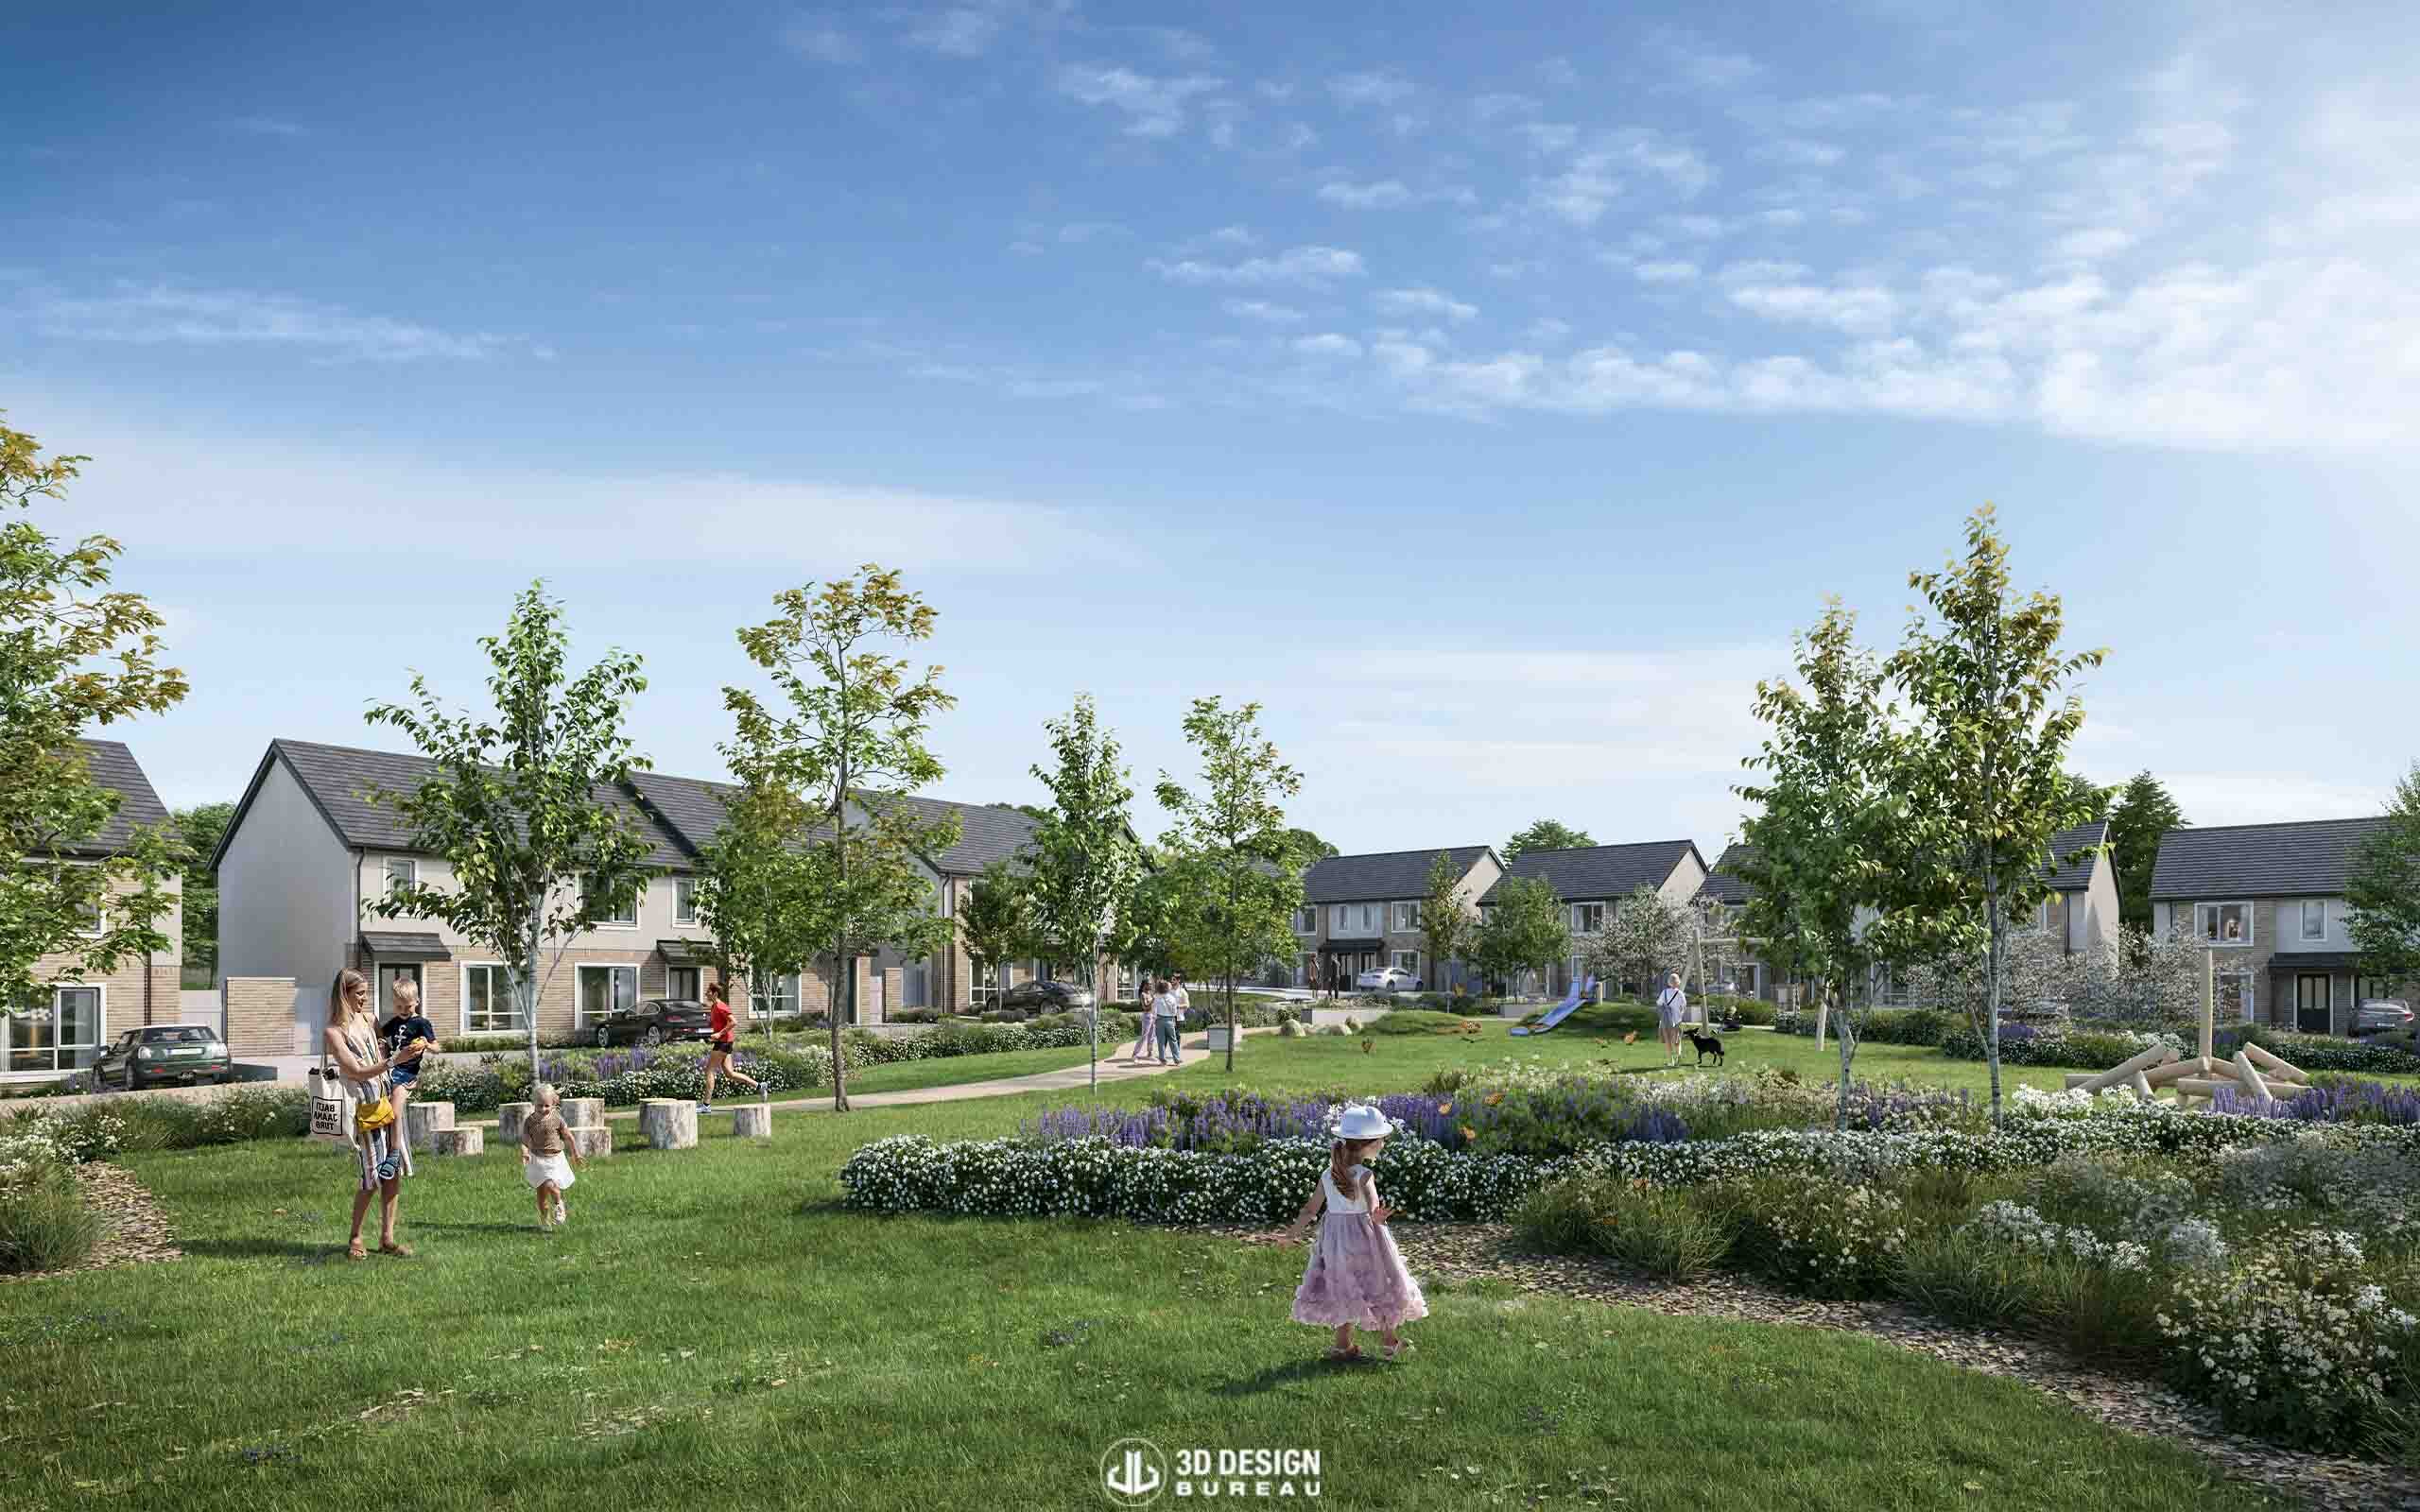 Architectural CGI of proposed Residential Development in Caragh, Kildare.